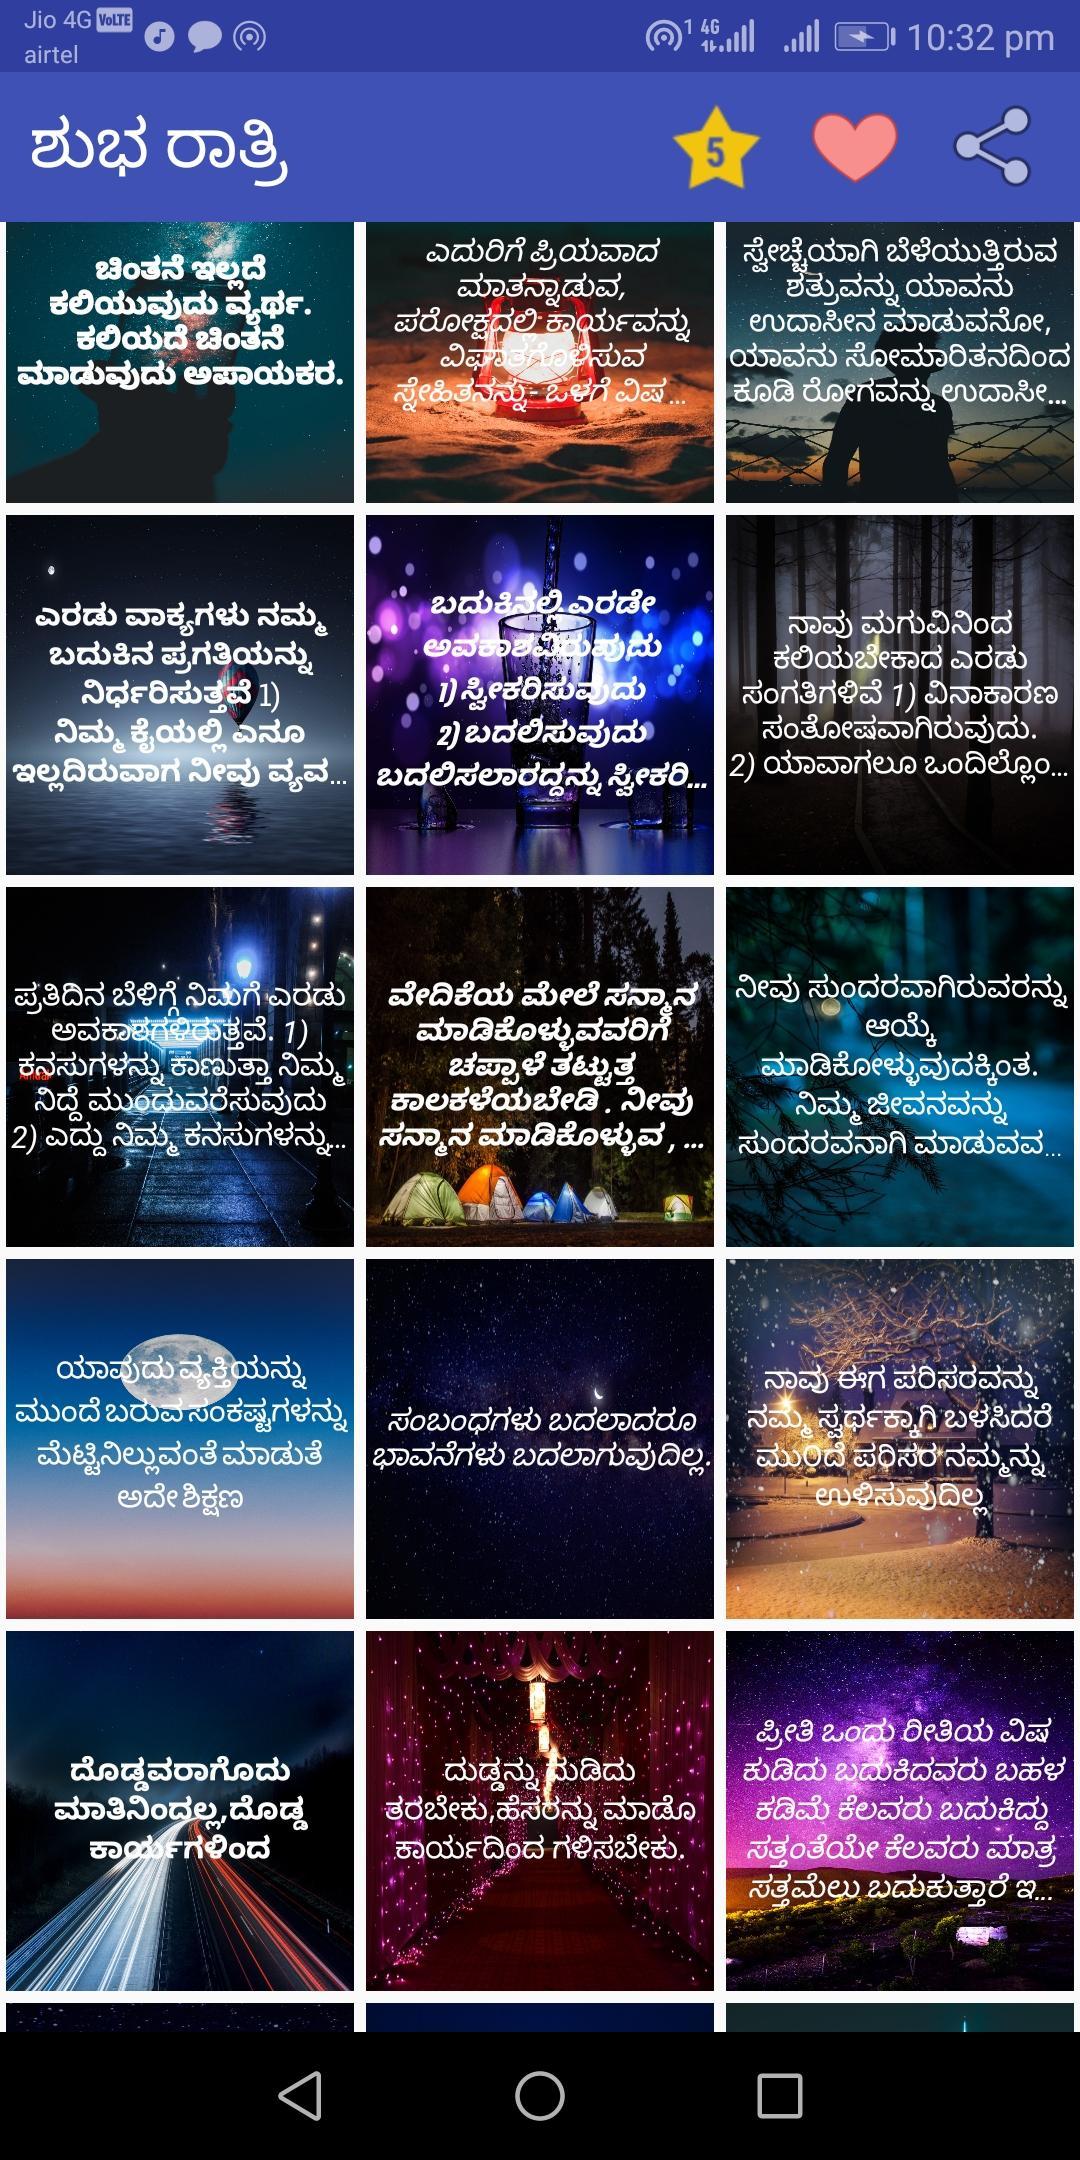 Kannada Good Night Quotes Images À²¶ À²­ À²° À²¤ À²° For Android Apk Download Huge collection of trolls, malayalam movie news & reviews, malayalam dialogues & kerala photography, trolls and much more. kannada good night quotes images à²¶ à²­